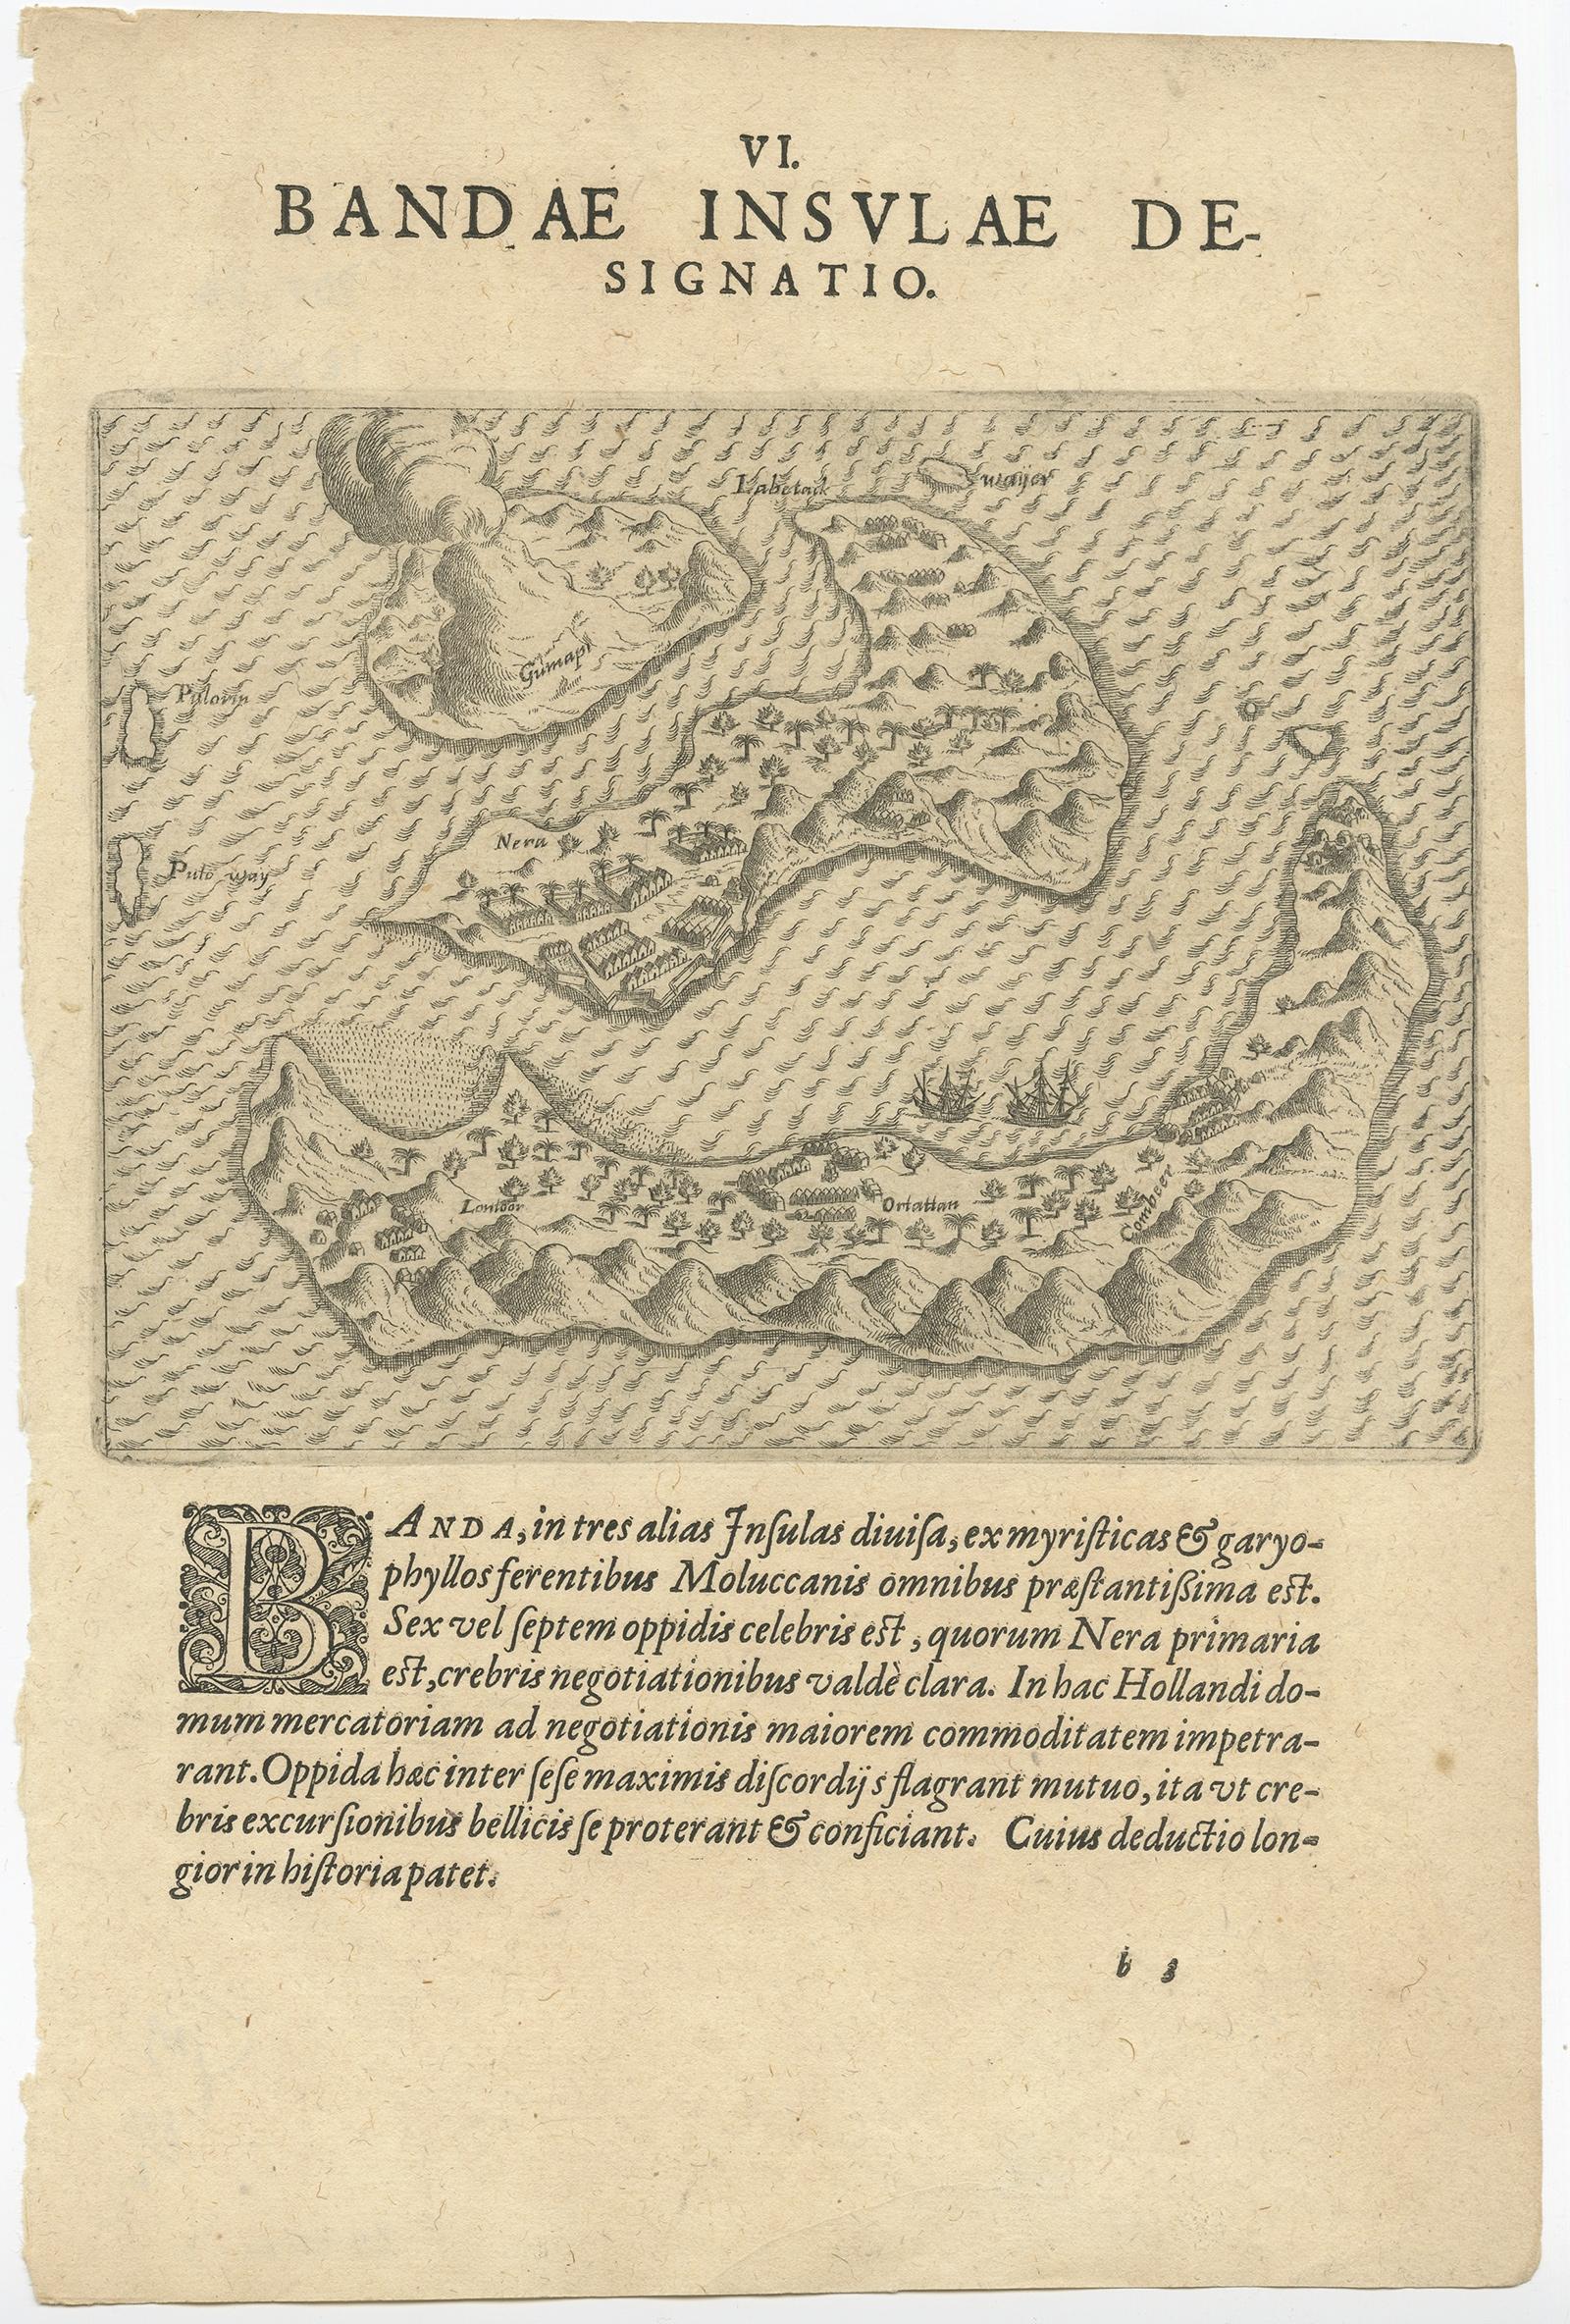 Antique map Indonesia titled 'Bandae Insulae designatio'. Antique map depicting the Banda Islands, Indonesia. With Latin text, blank verso. Originates from 'Indiae Orientalis' by T. de Bry. 

Artists and Engravers: Johann Theodor de Bry (1561 -